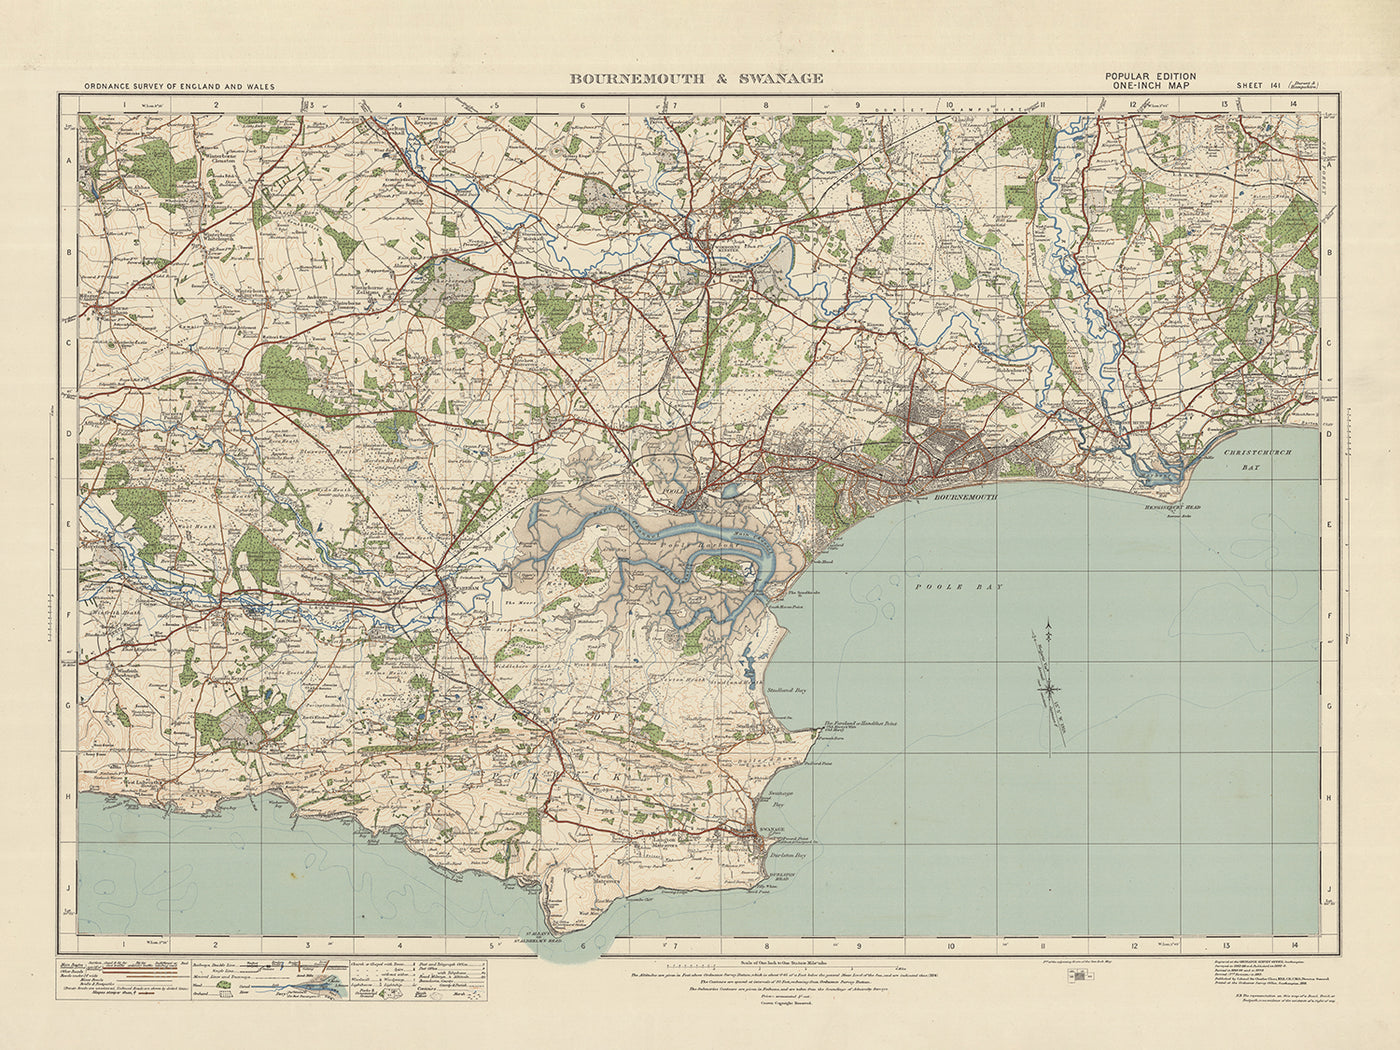 Old Ordnance Survey Map, Sheet 141 - Bournemouth & Swanage, 1919-1926: Poole, Christchurch, Wareham, Poole Harbour, Isle of Purbeck, Corfe Castle